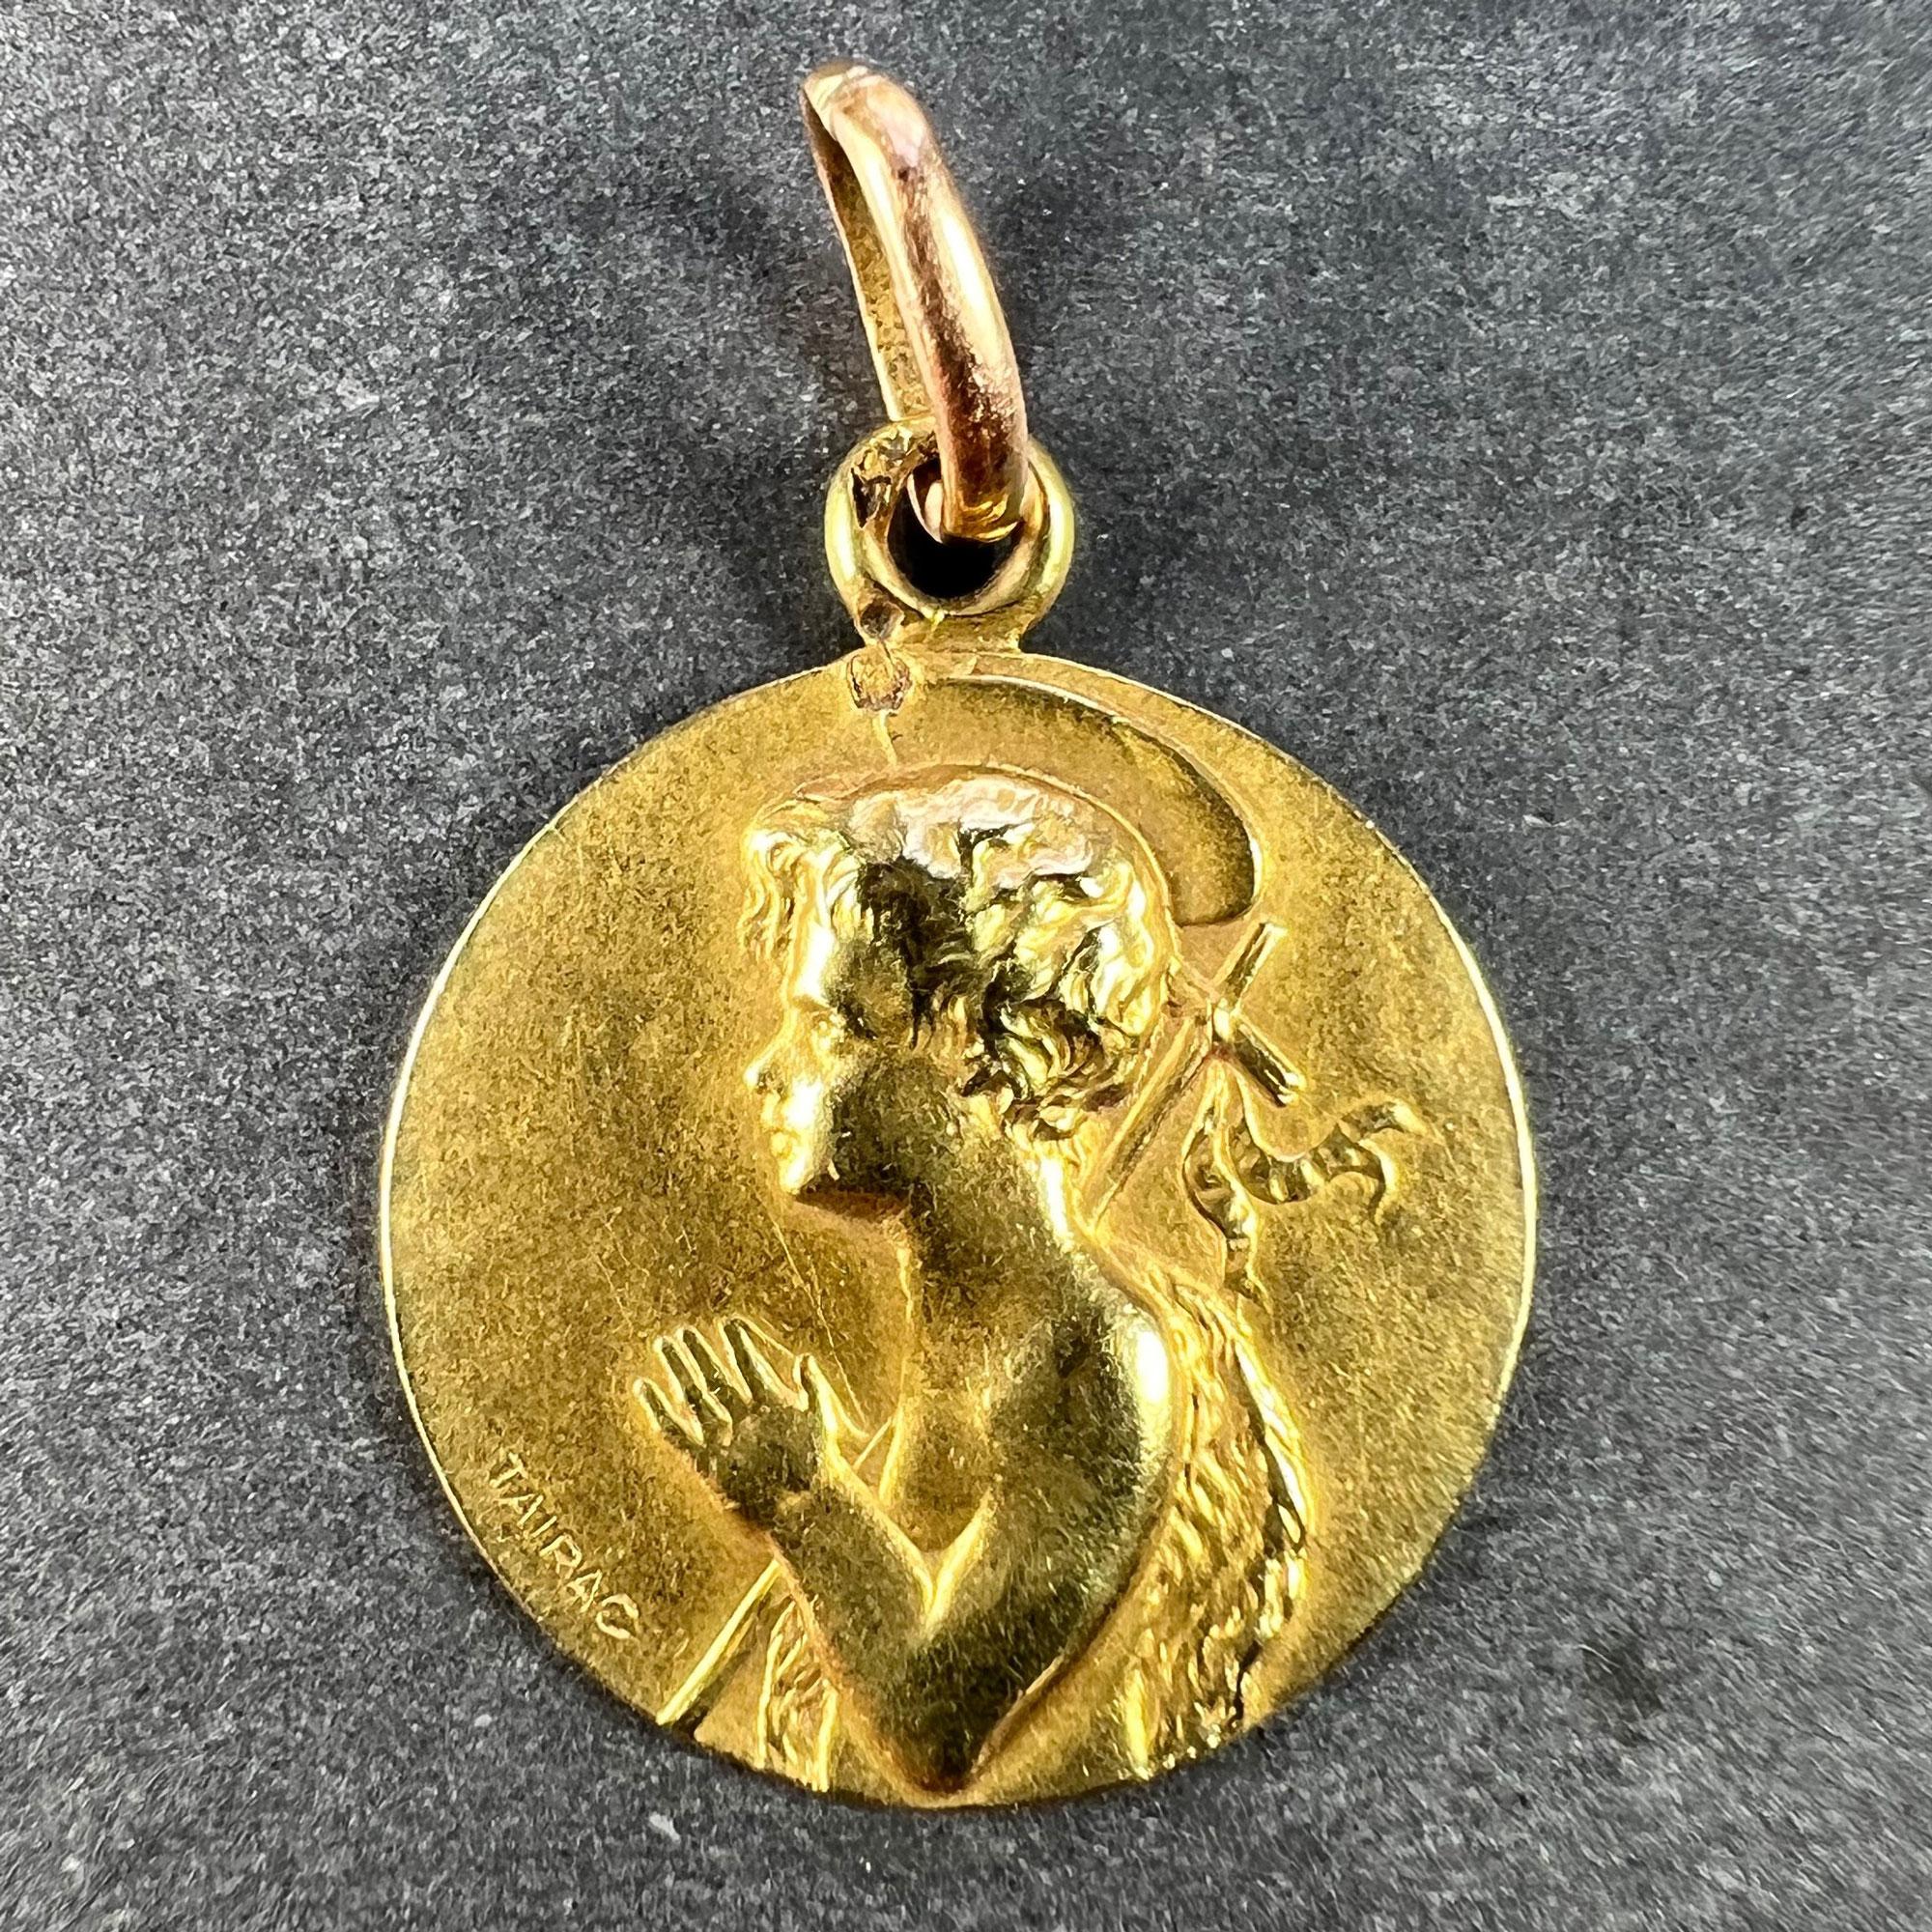 A French 18 karat (18K) yellow gold charm pendant designed as a medal representing Saint John the Baptist as a child with a cross and a sheepskin over one shoulder. Signed Tairac, stamped with the eagle's head for French manufacture and 18 karat